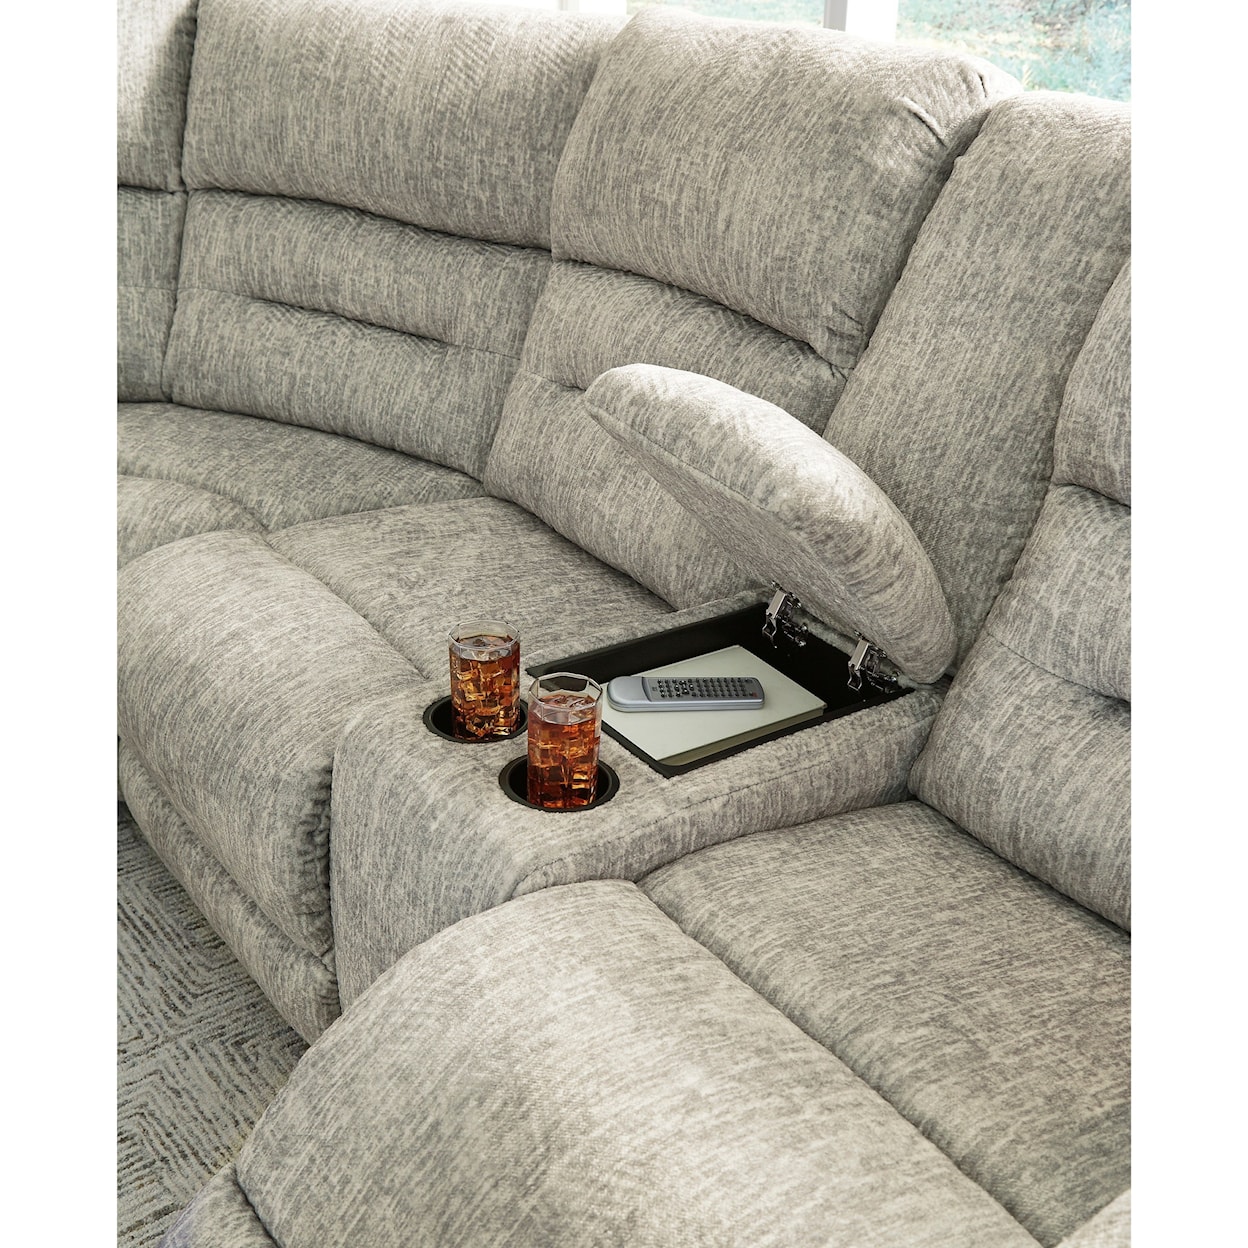 Signature Design by Ashley Family Den Power Reclining Sectional